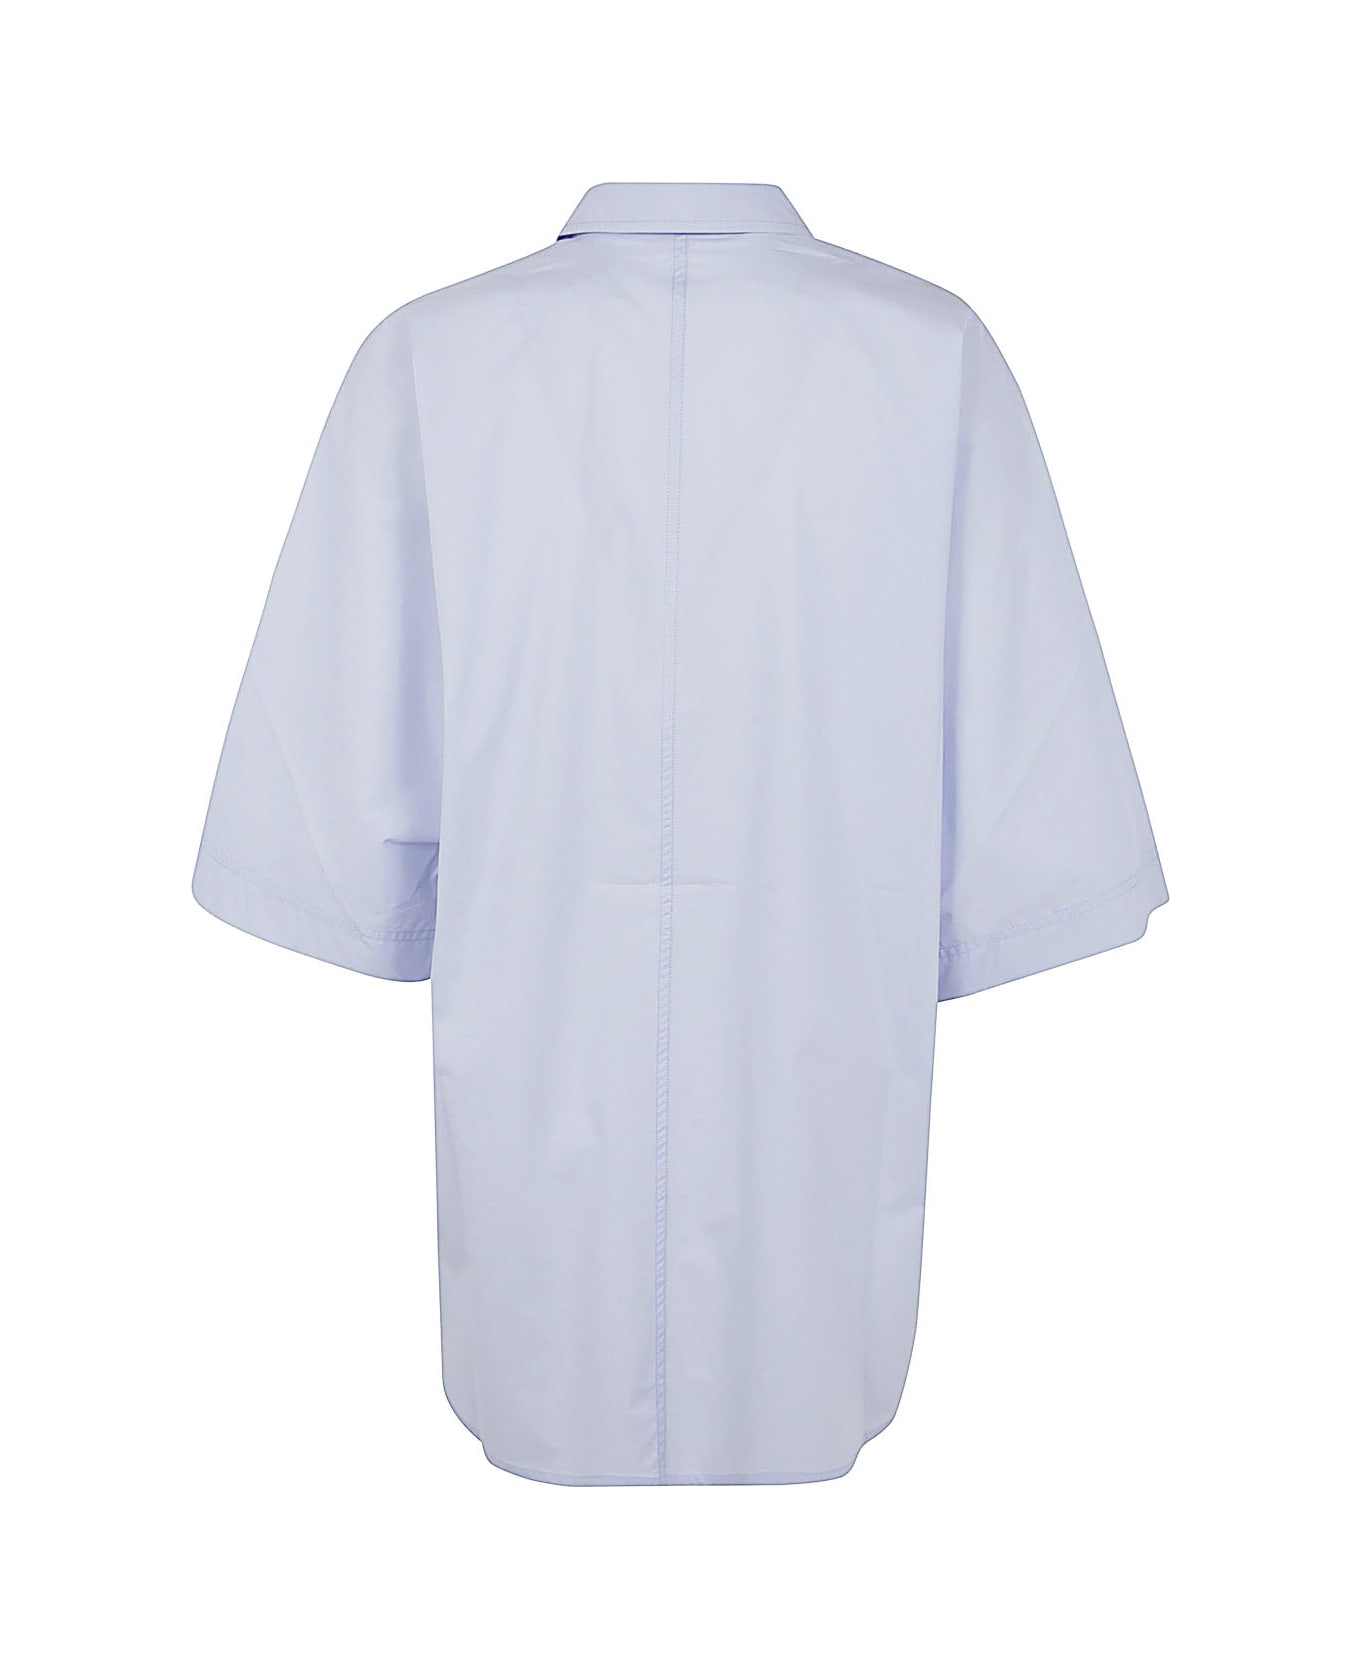 Sofie d'Hoore Short Sleeve Shirt With Front Placket - Waterfall